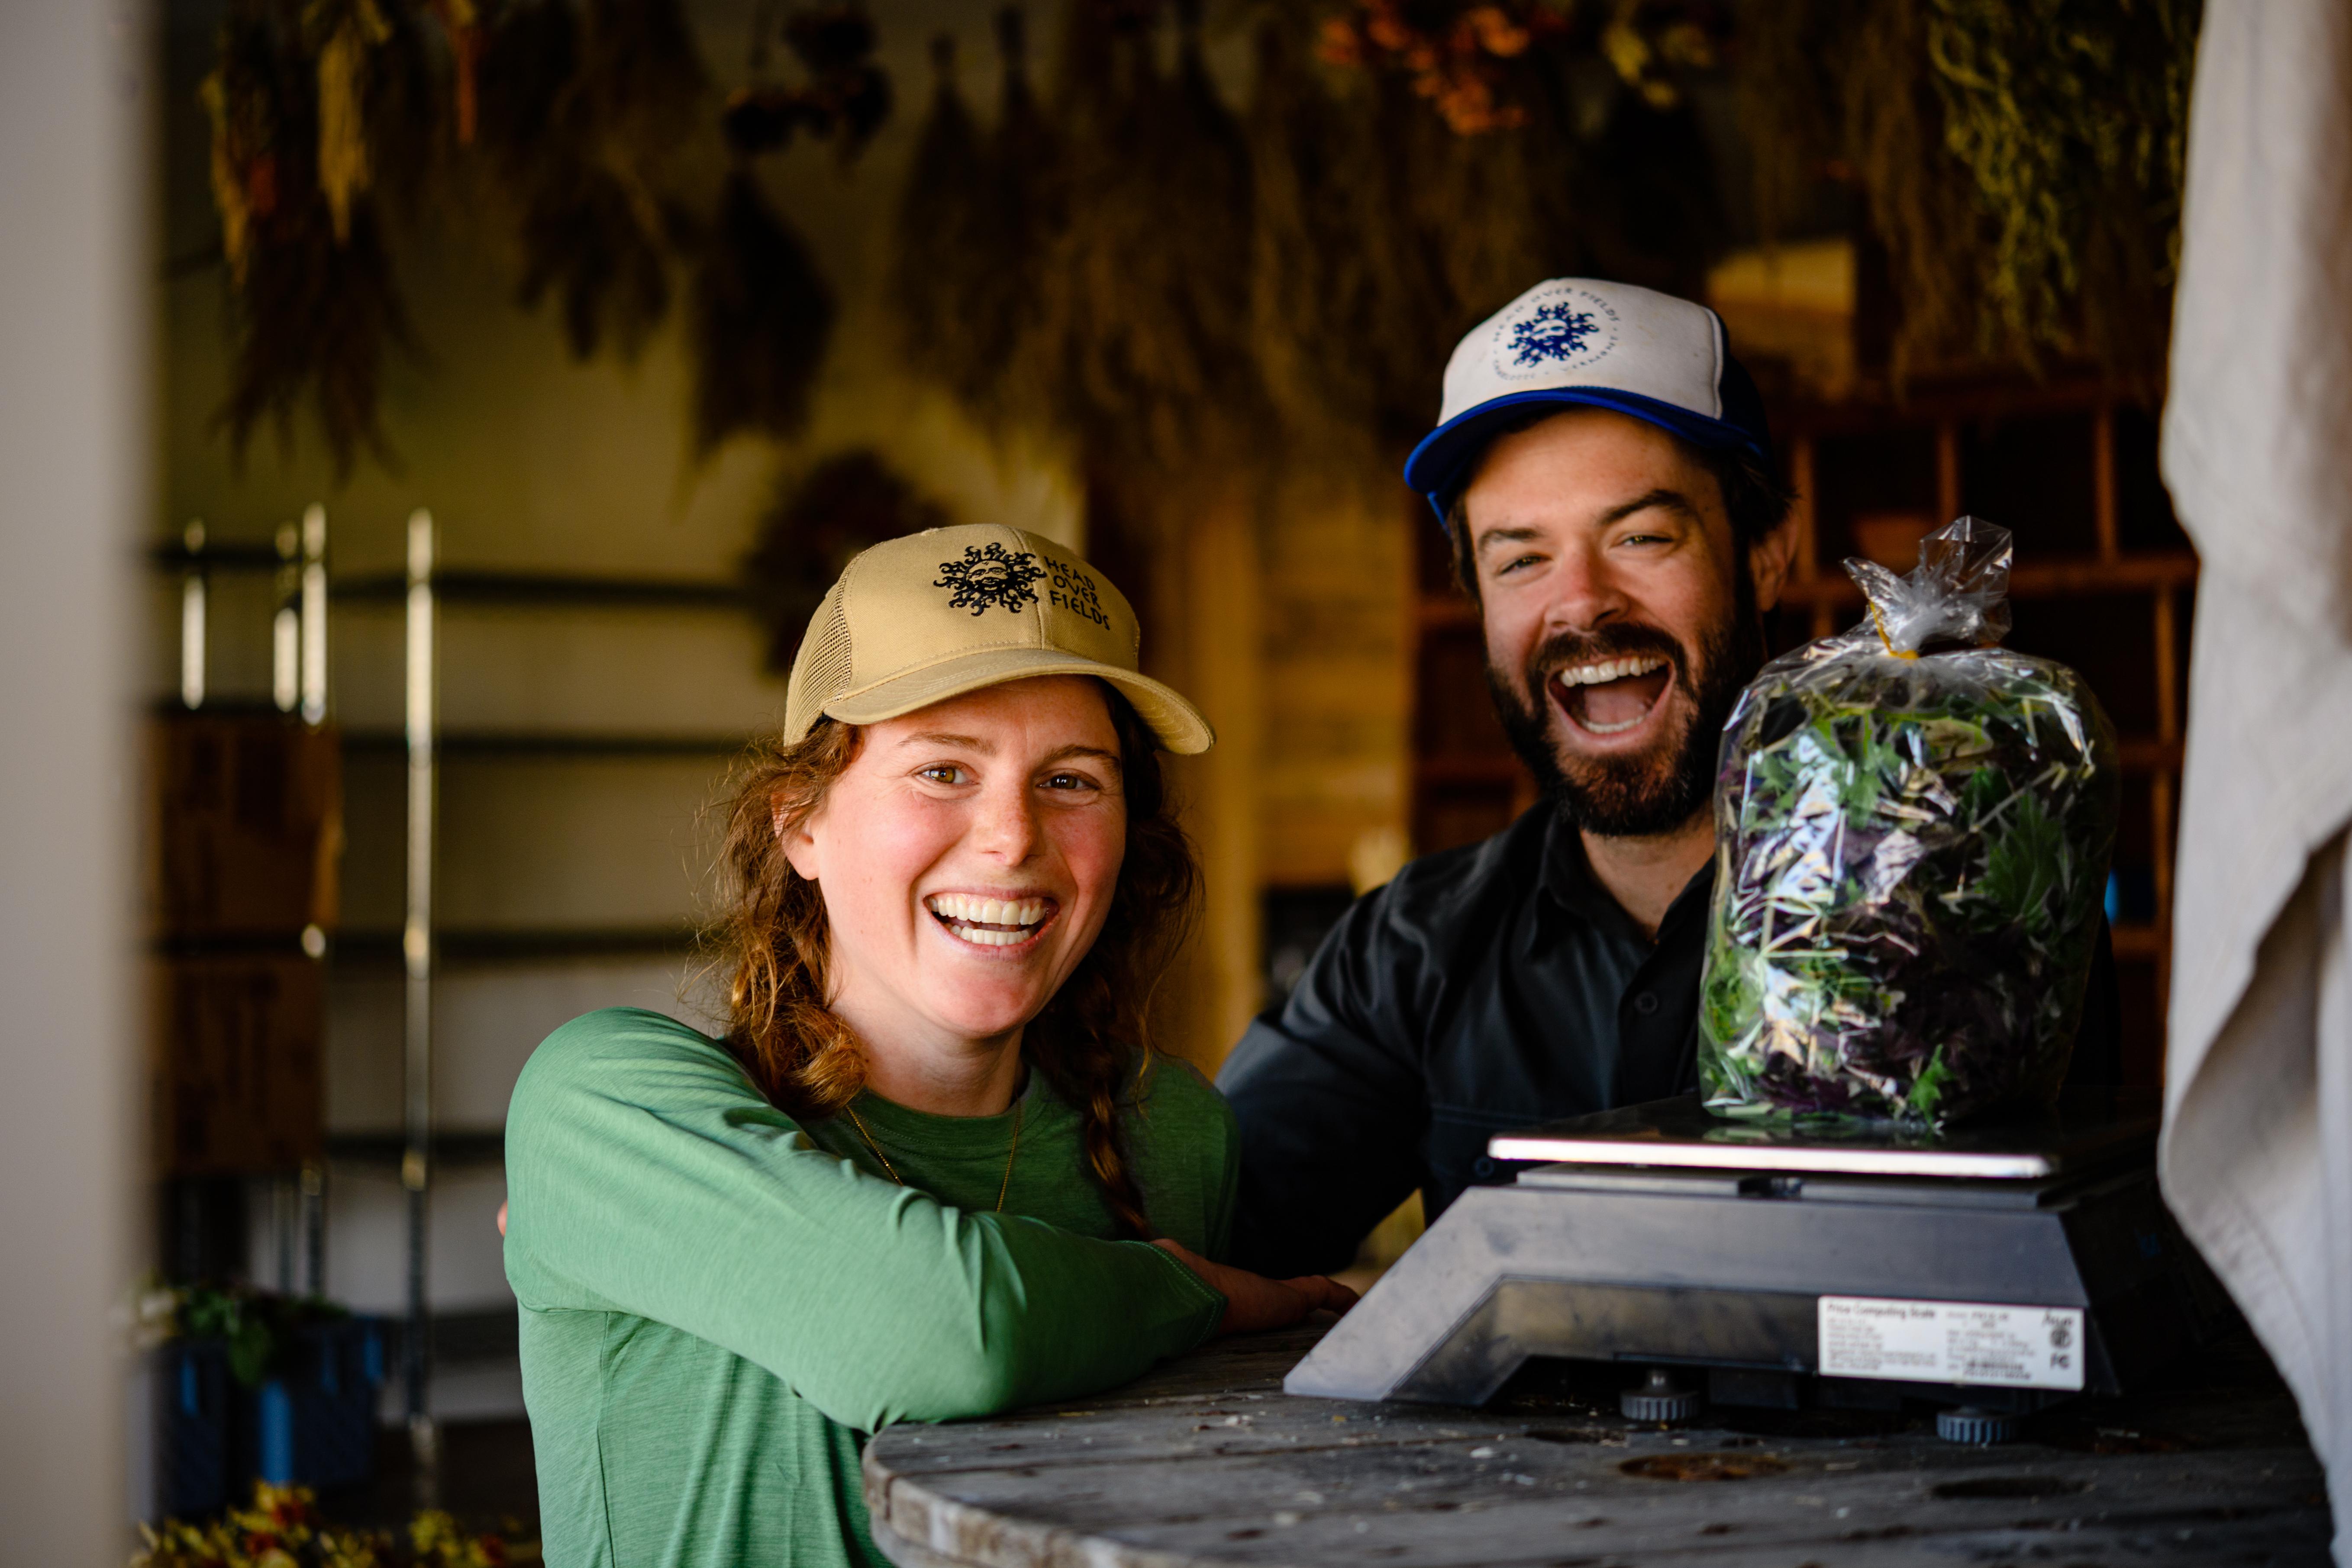 Farmers Katie Rose and Brian of Head Over Fields Farm smiling at their farmstand